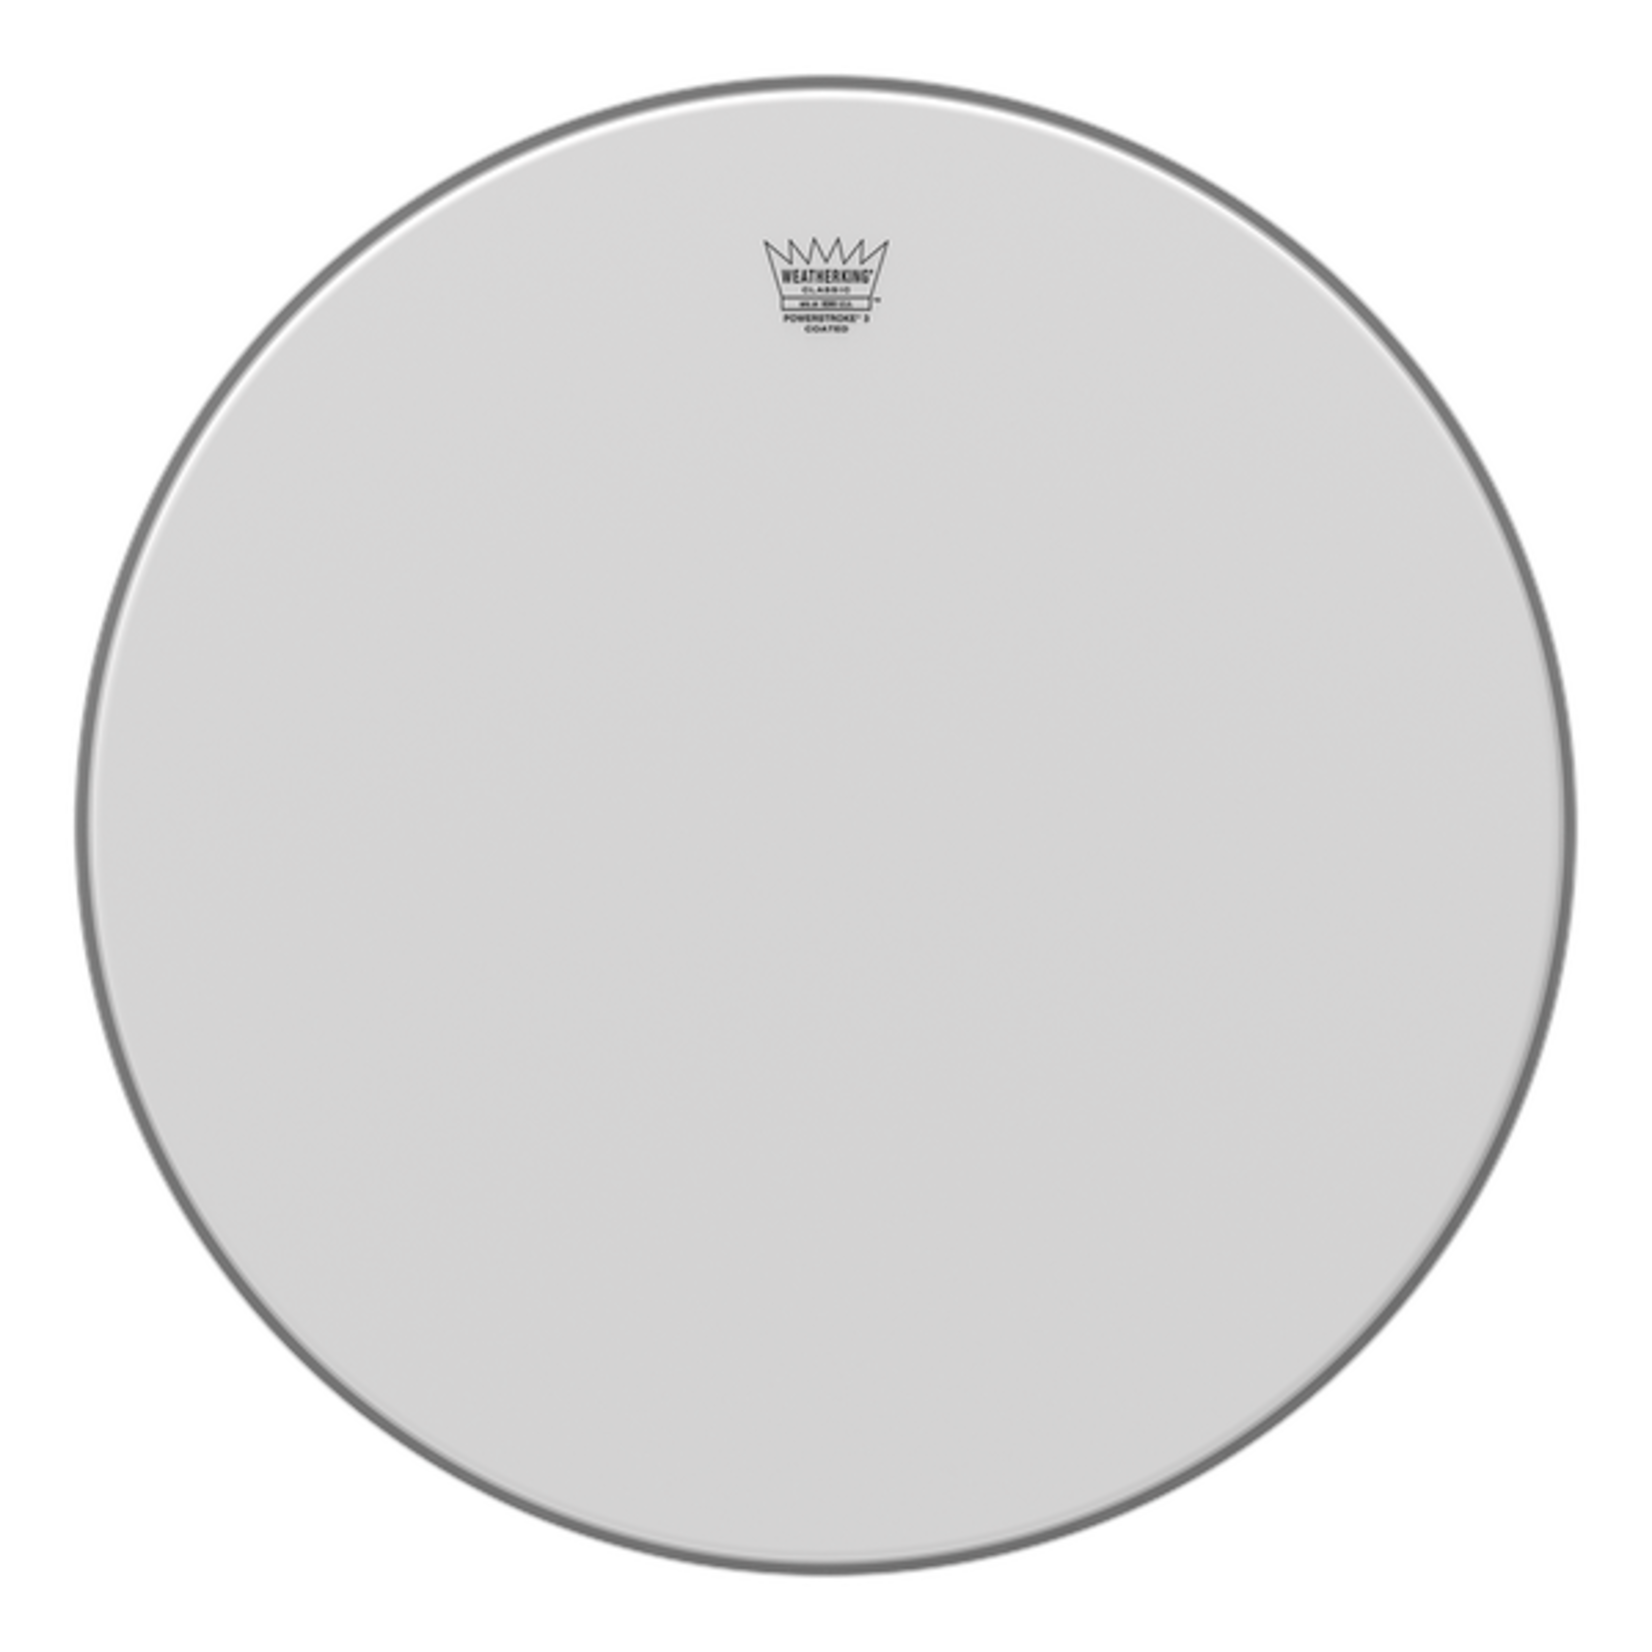 Remo Remo Coated Classic Fit Powerstroke 3 Bass Drum